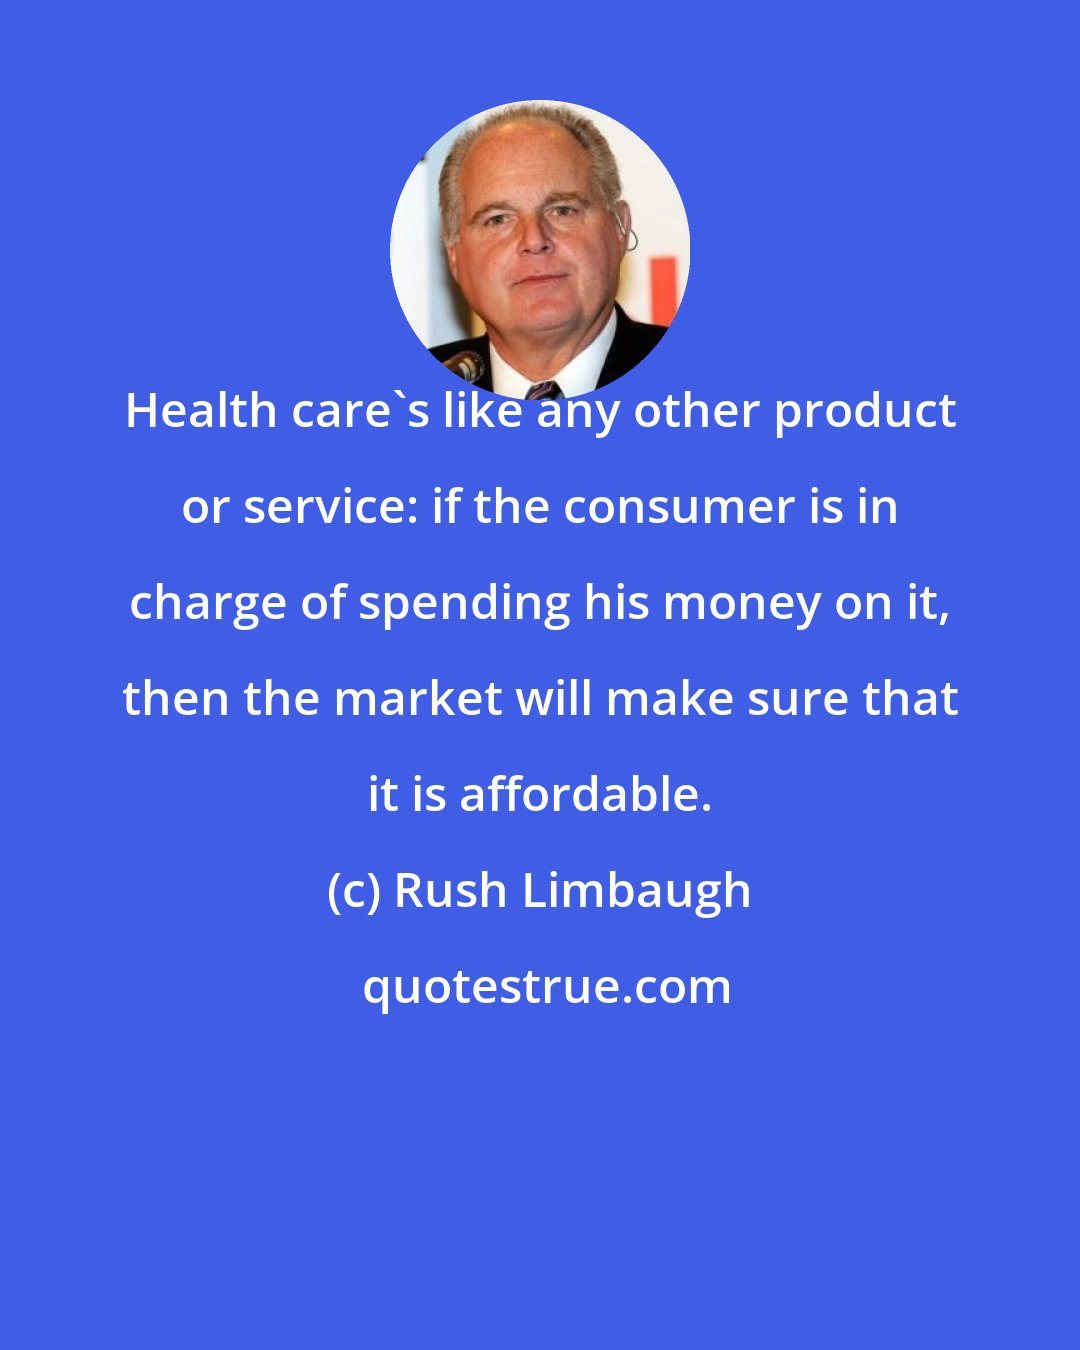 Rush Limbaugh: Health care's like any other product or service: if the consumer is in charge of spending his money on it, then the market will make sure that it is affordable.